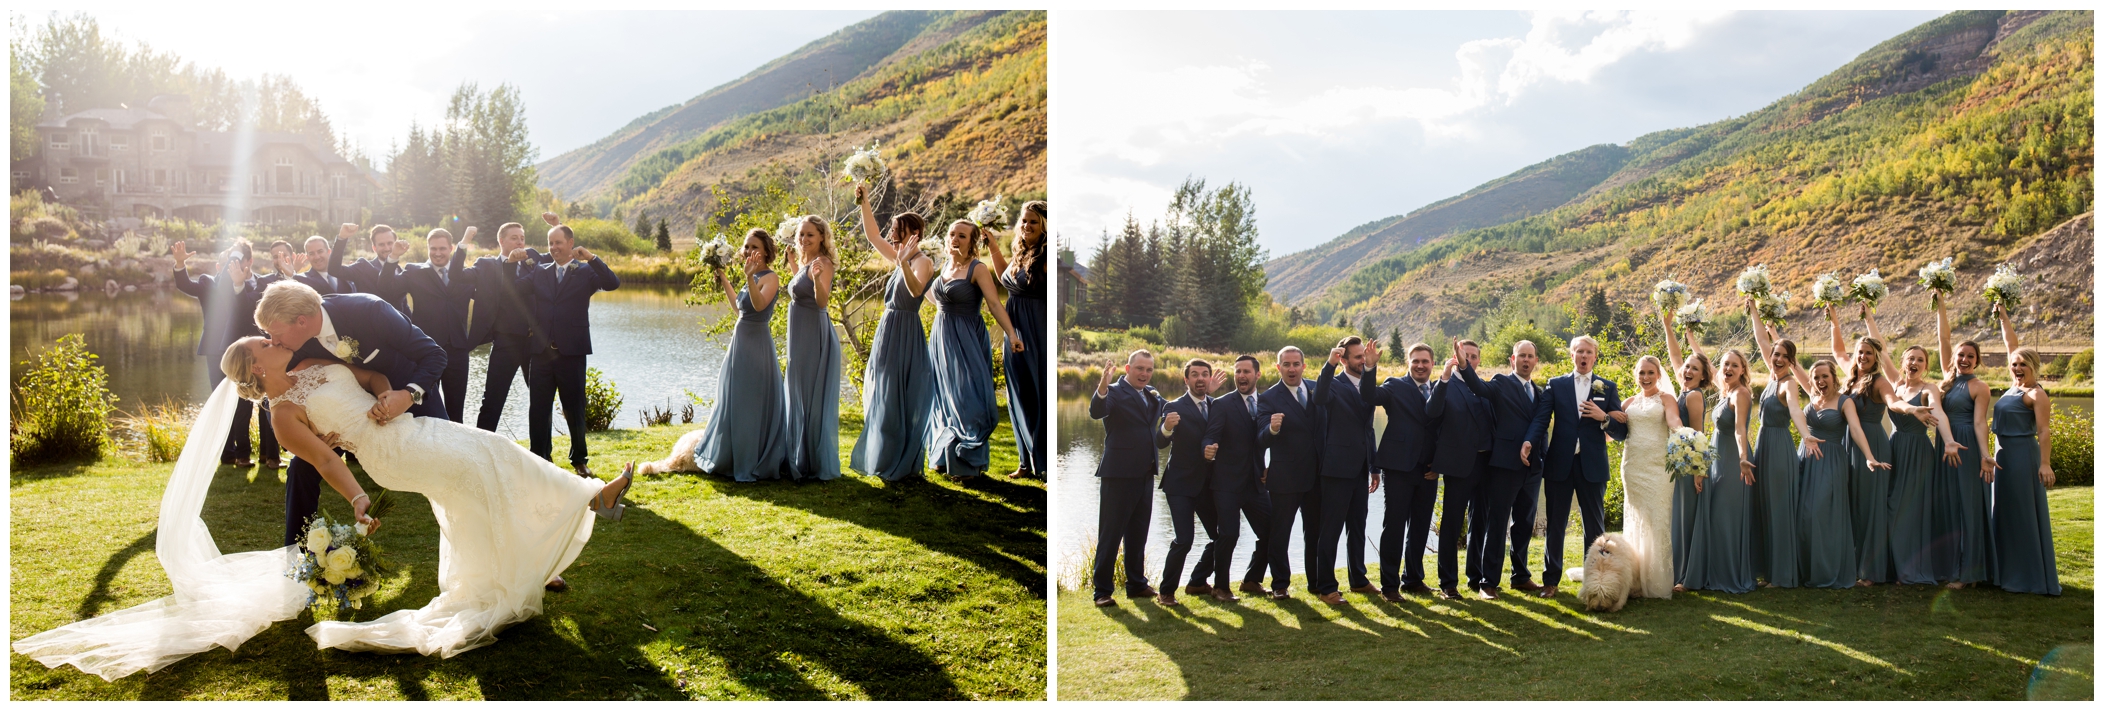 bridal party in multiple shades of blue posing by lake 